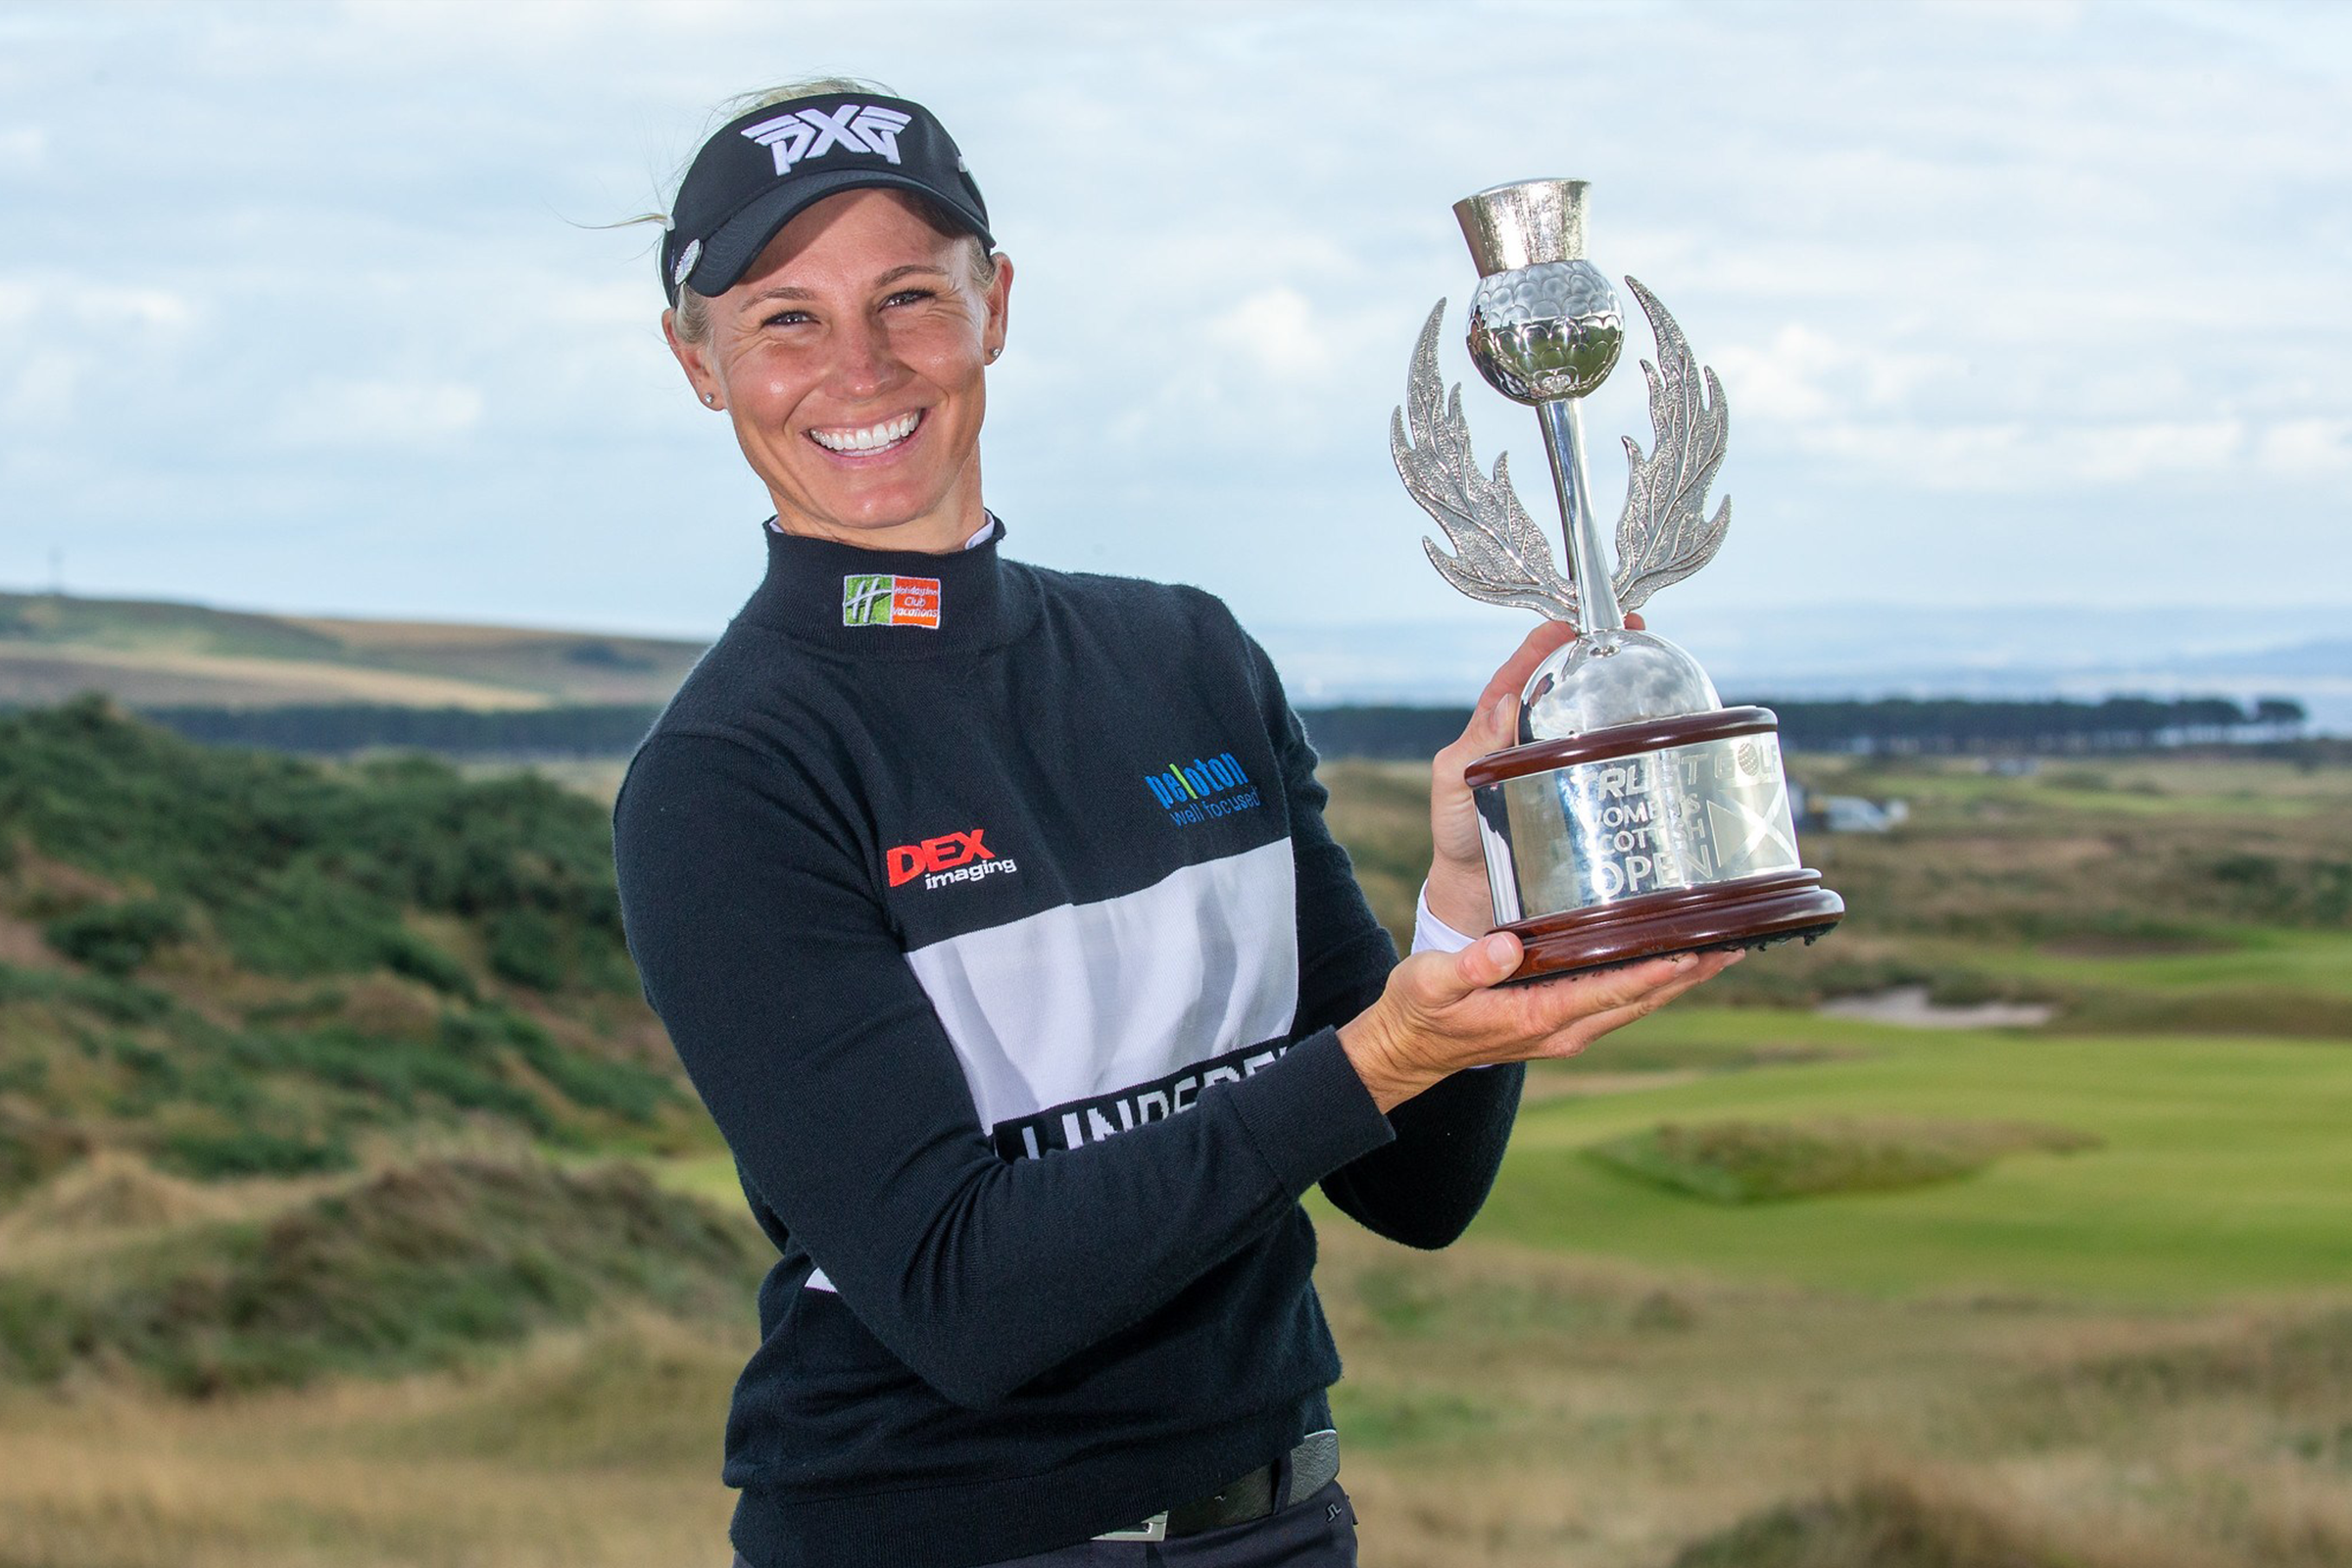 O'TOOLE KEEPS HER COOL TO CLAIM TRUST GOLF WOMEN'S SCOTTISH OPEN VICTORY